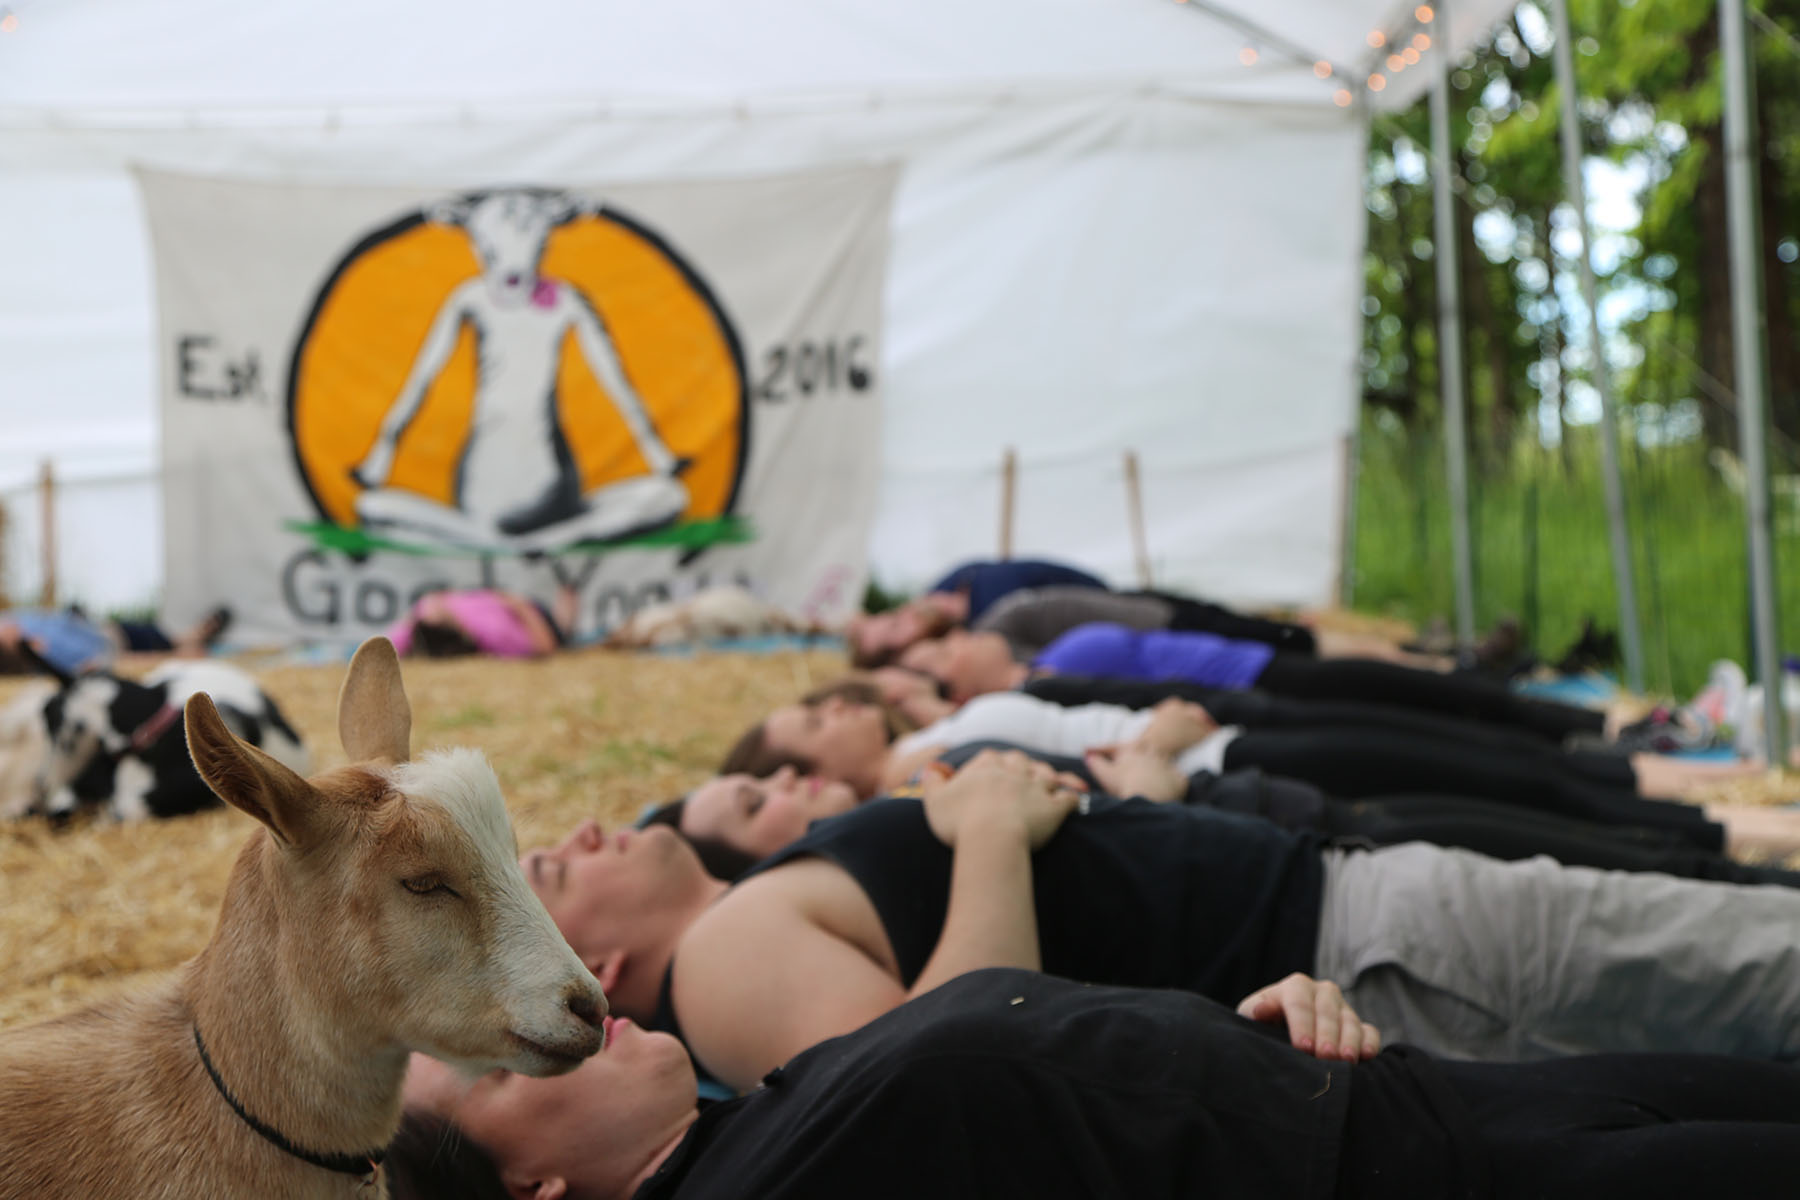 PHOTO:Lainey Morse said she started goat yoga classes in Oregon in August 2016.